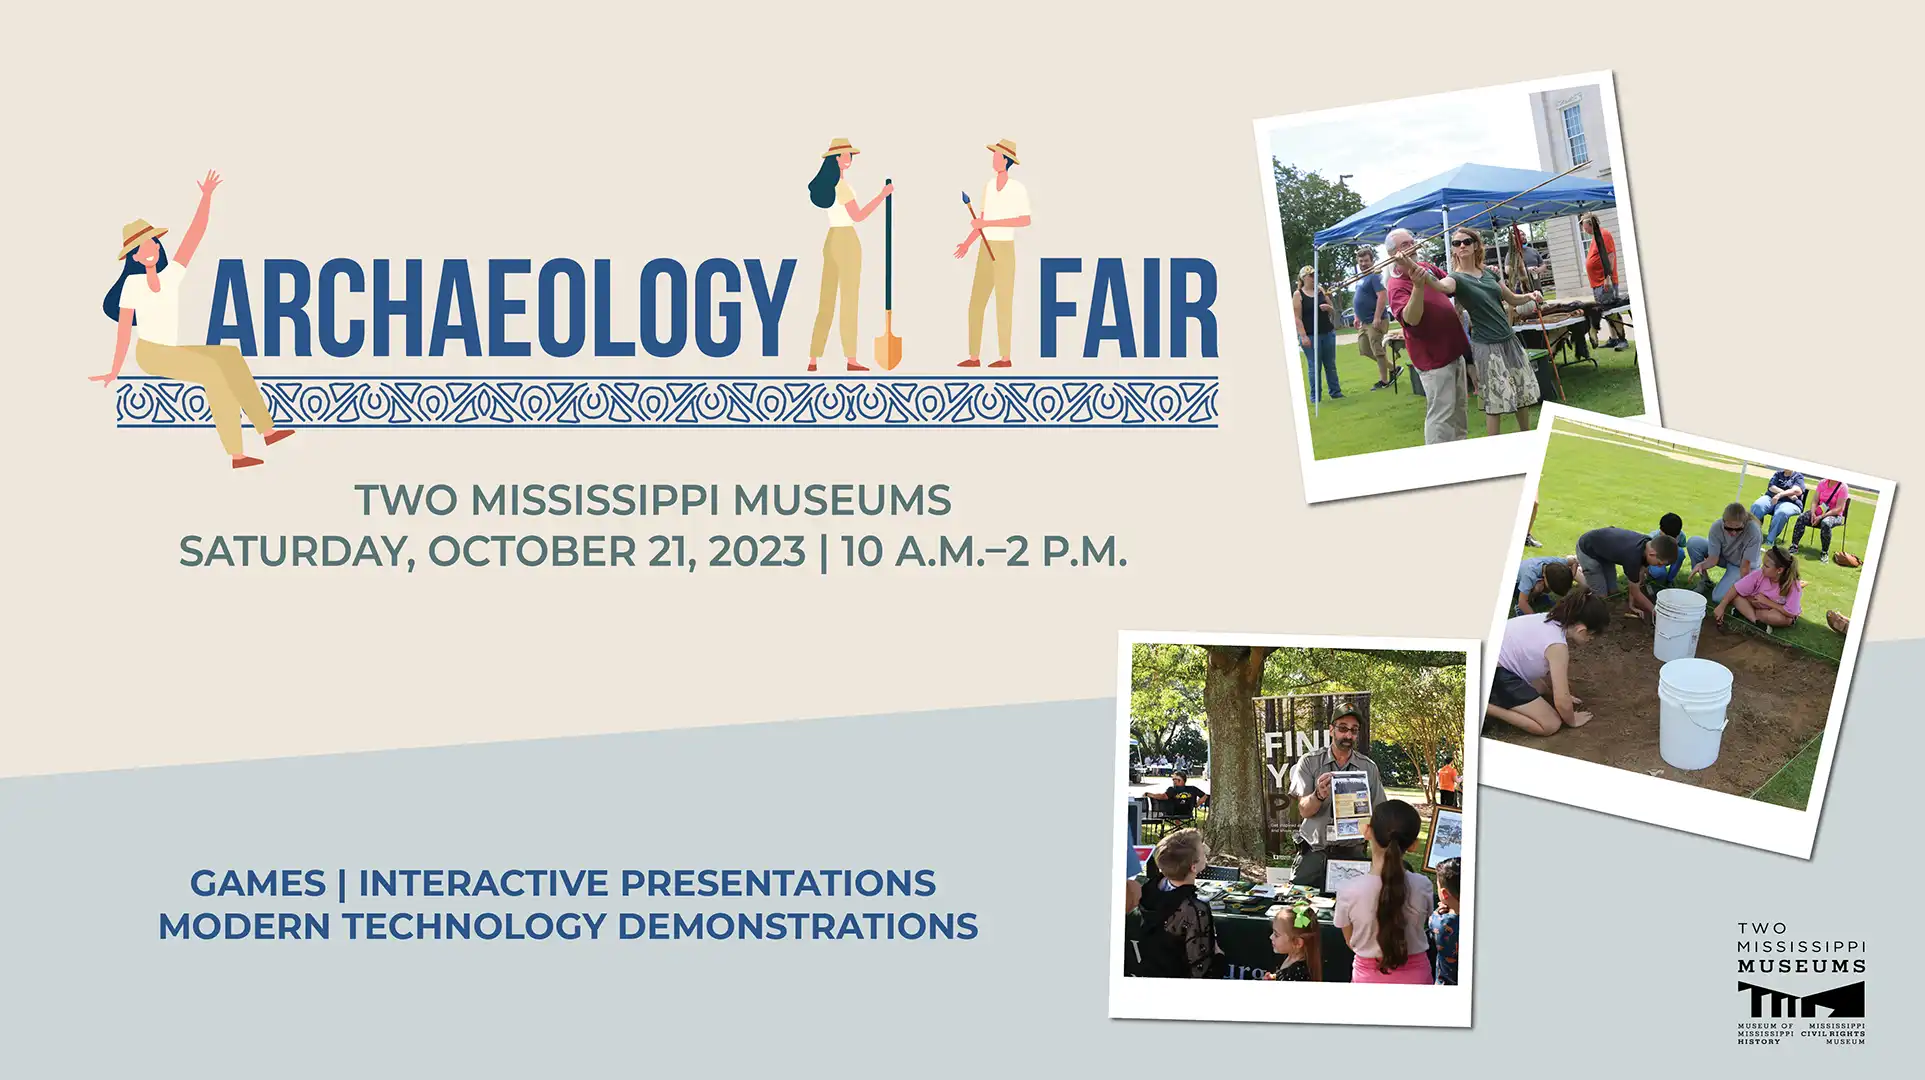 Archaeology Fair, October 21, 2023 at the Two Mississippi Museums